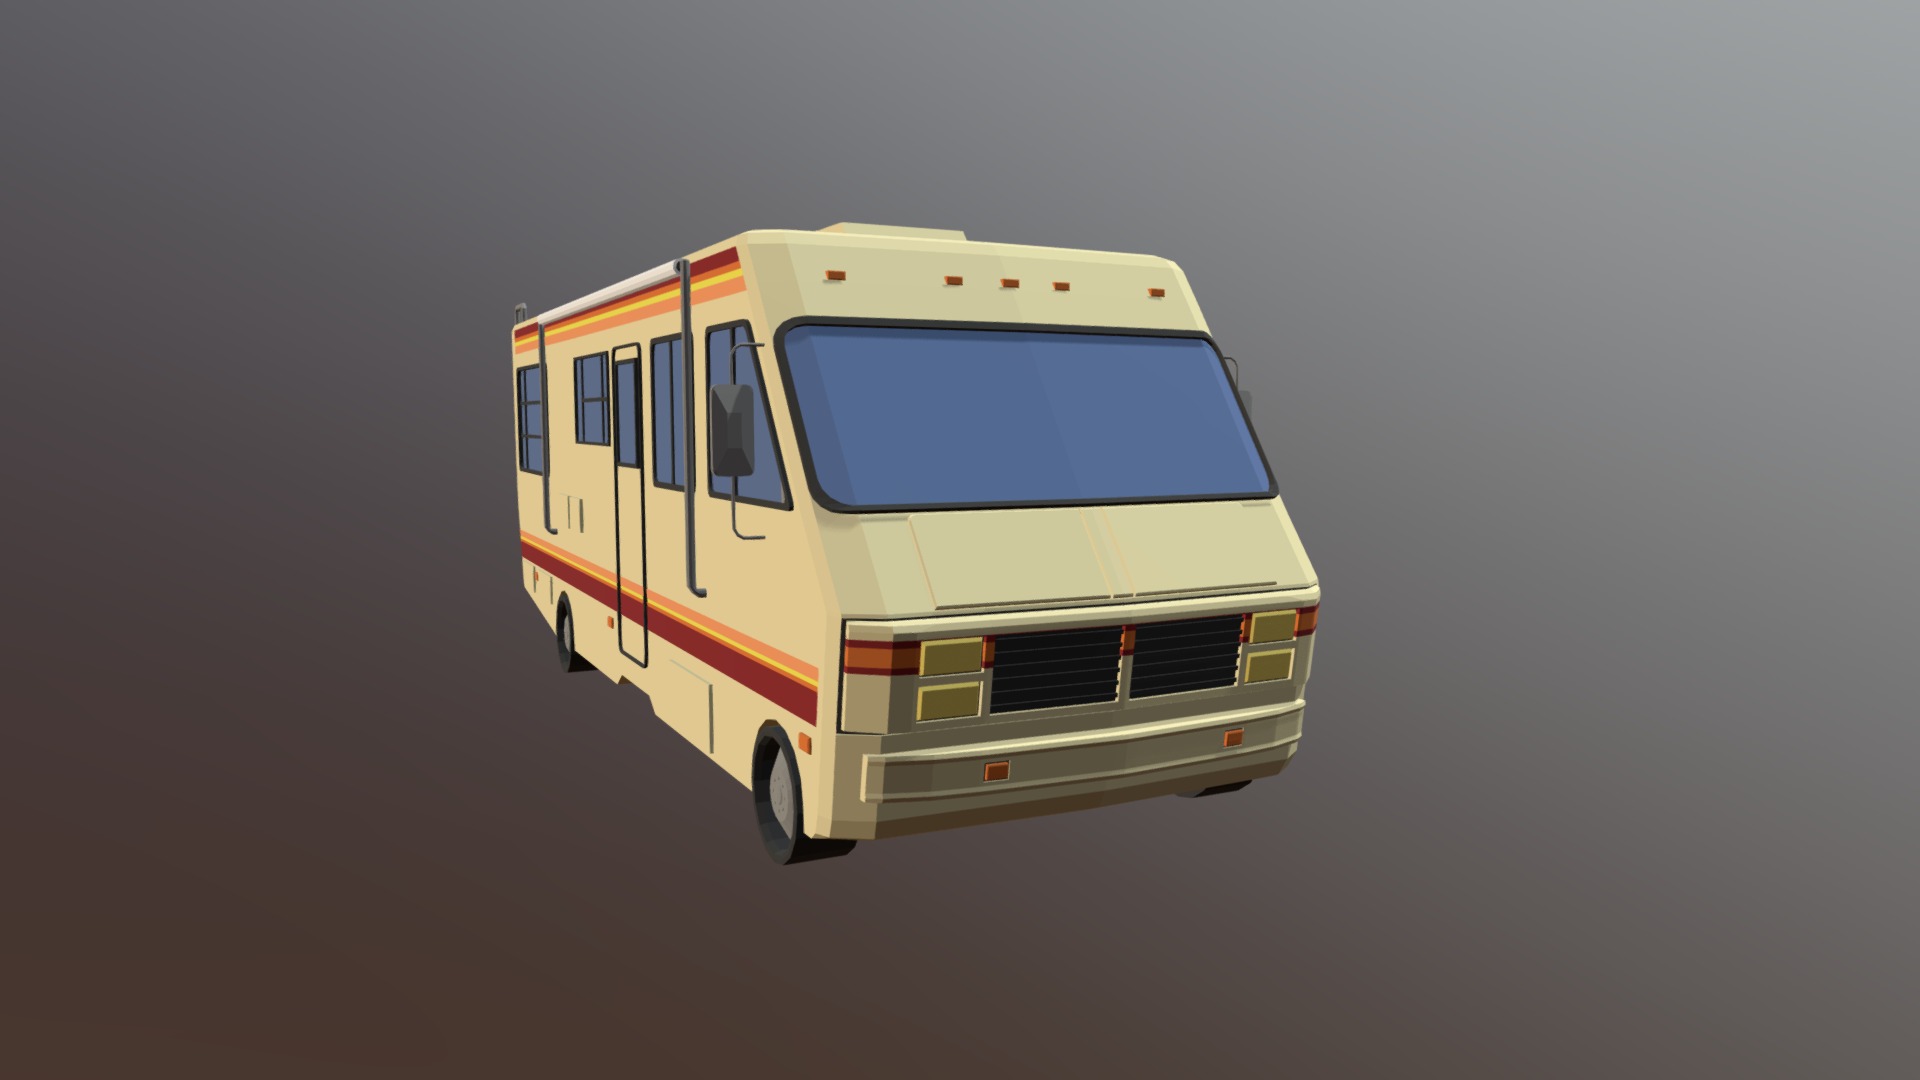 3D model RV - This is a 3D model of the RV. The 3D model is about a white and orange bus.